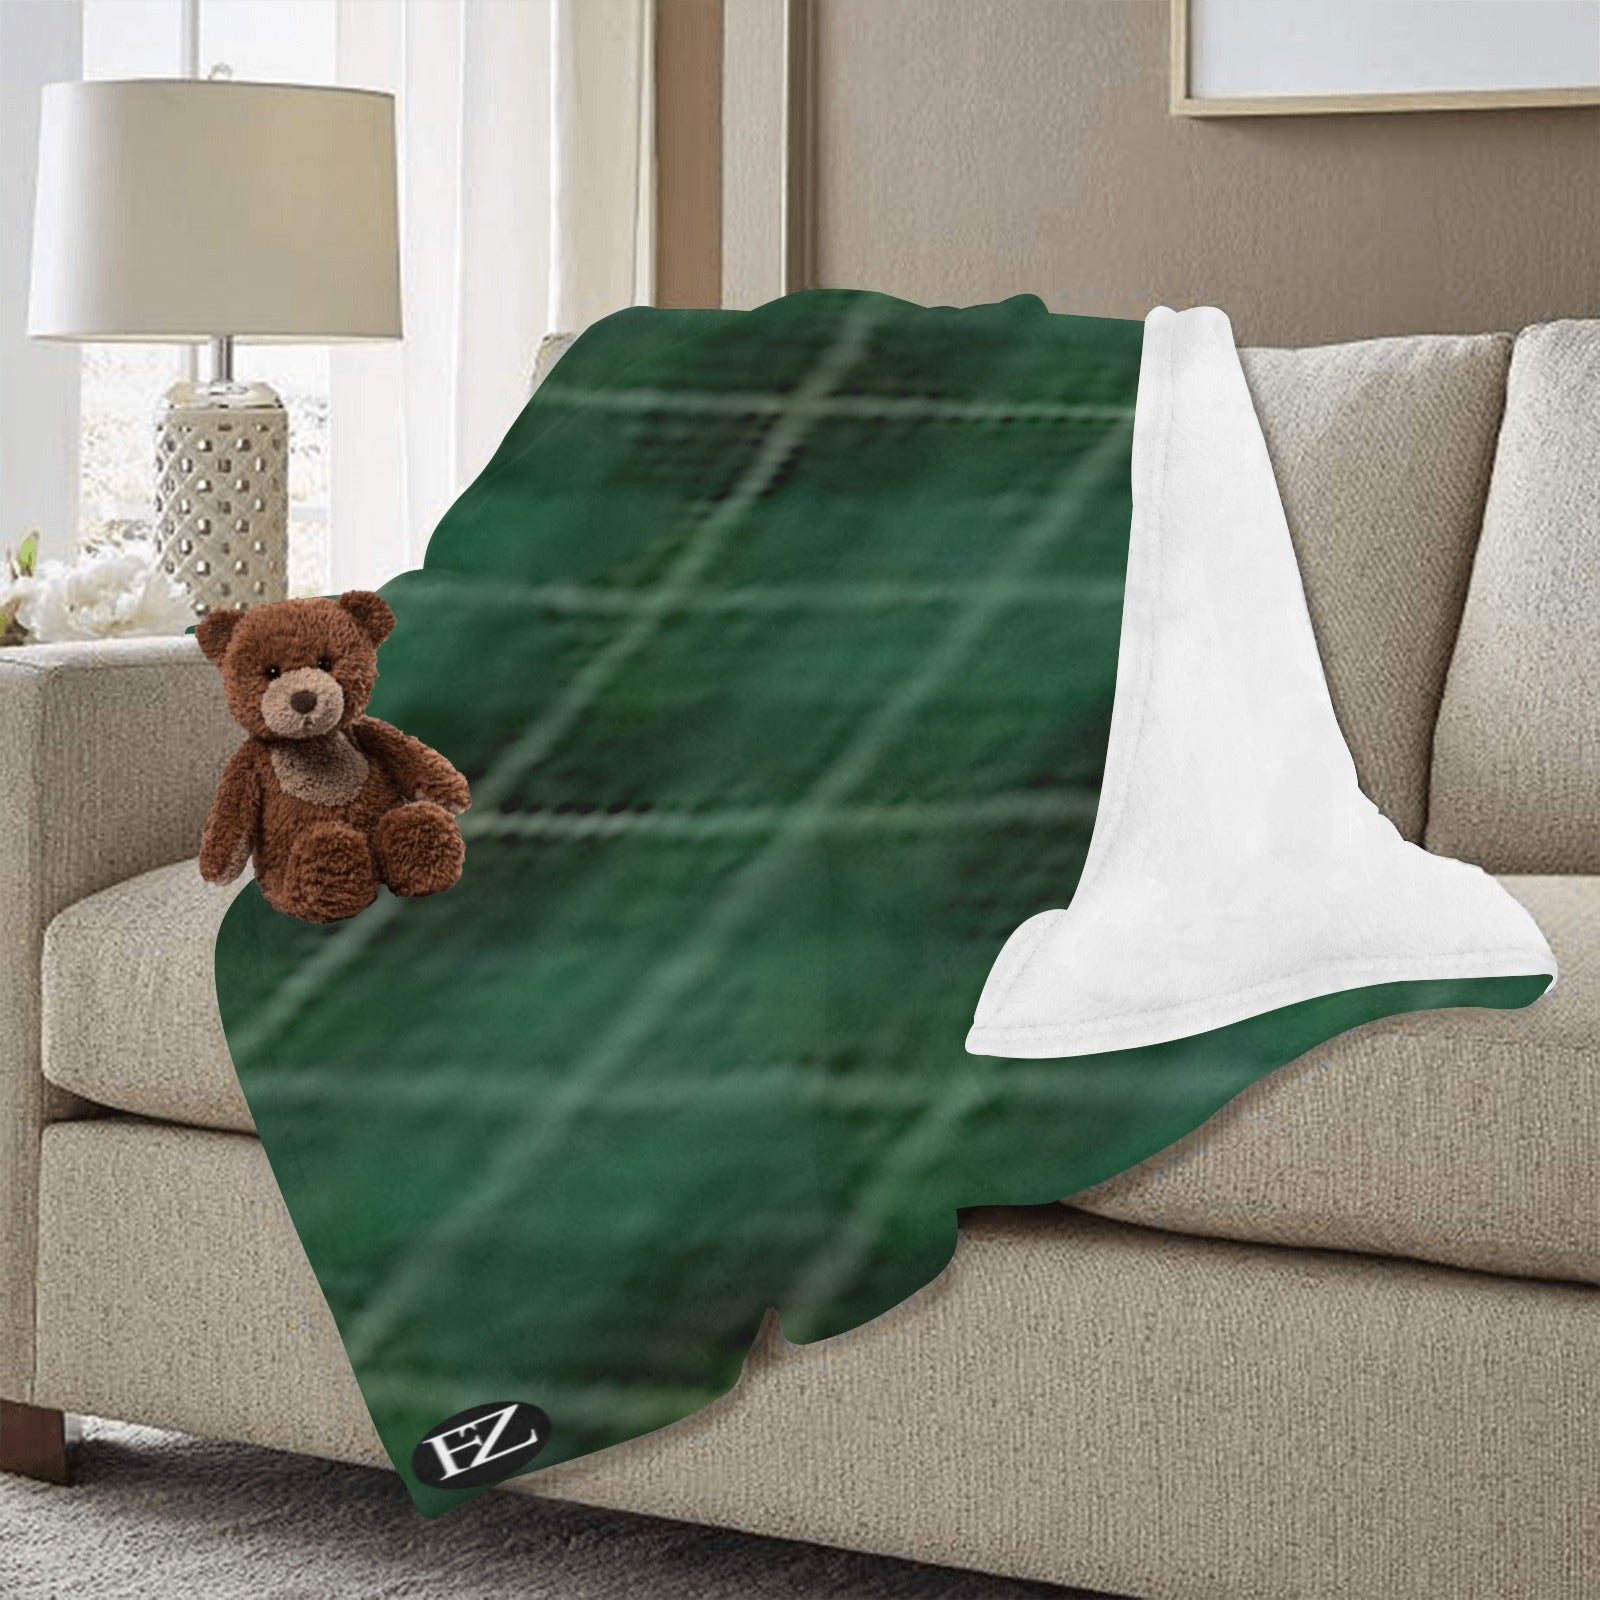 cozy thick blanket green ultra-soft micro fleece blanket 60"x80" (thick)